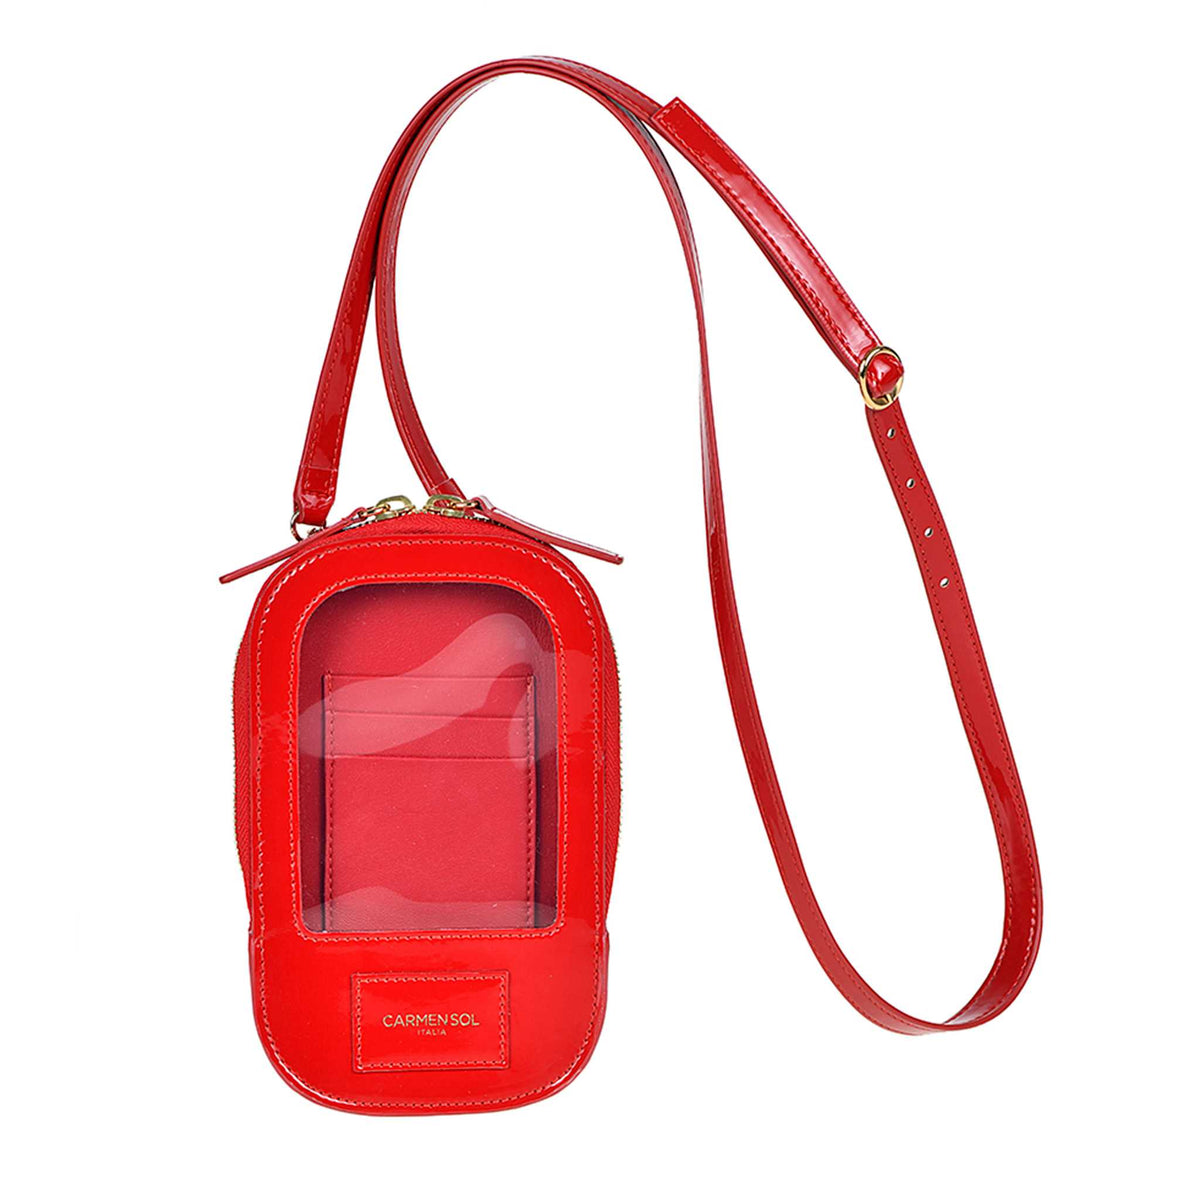 Red Gio smartphone holder from Carmen Sol